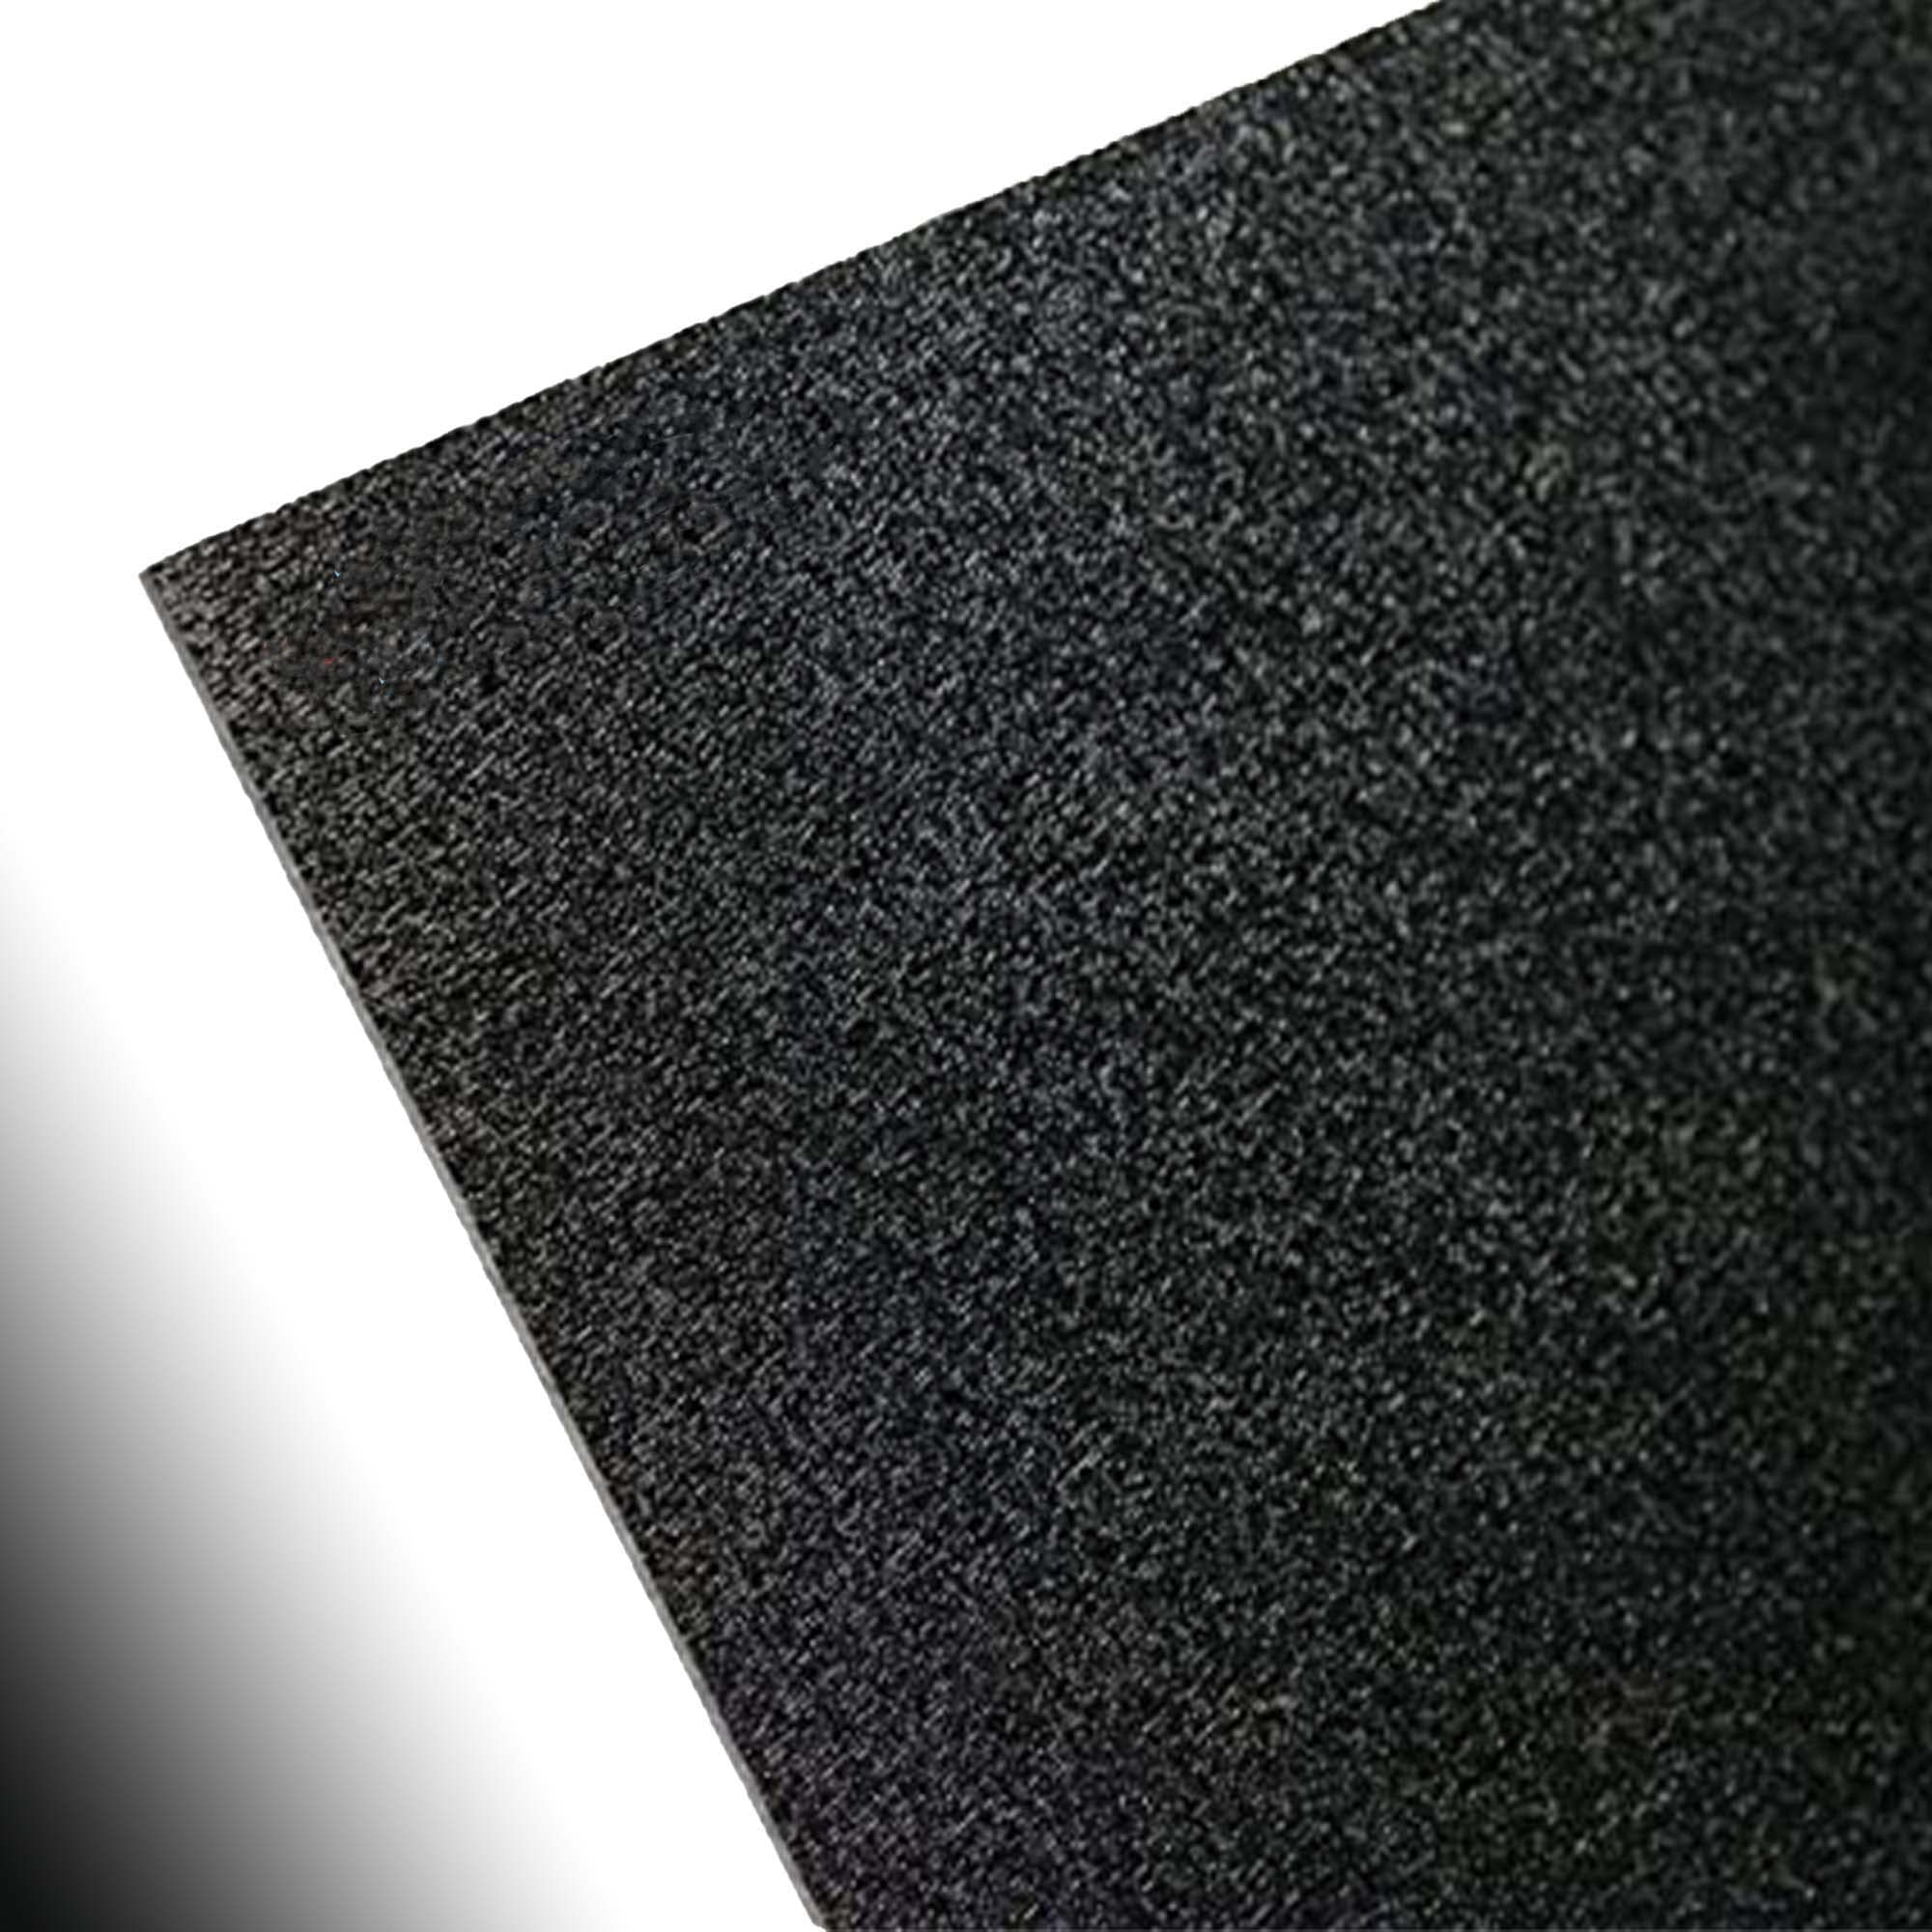 Polymersan Abs Black Plastic Sheet 14 X 12 X 12A Textured 1 Side Vacuum Forming